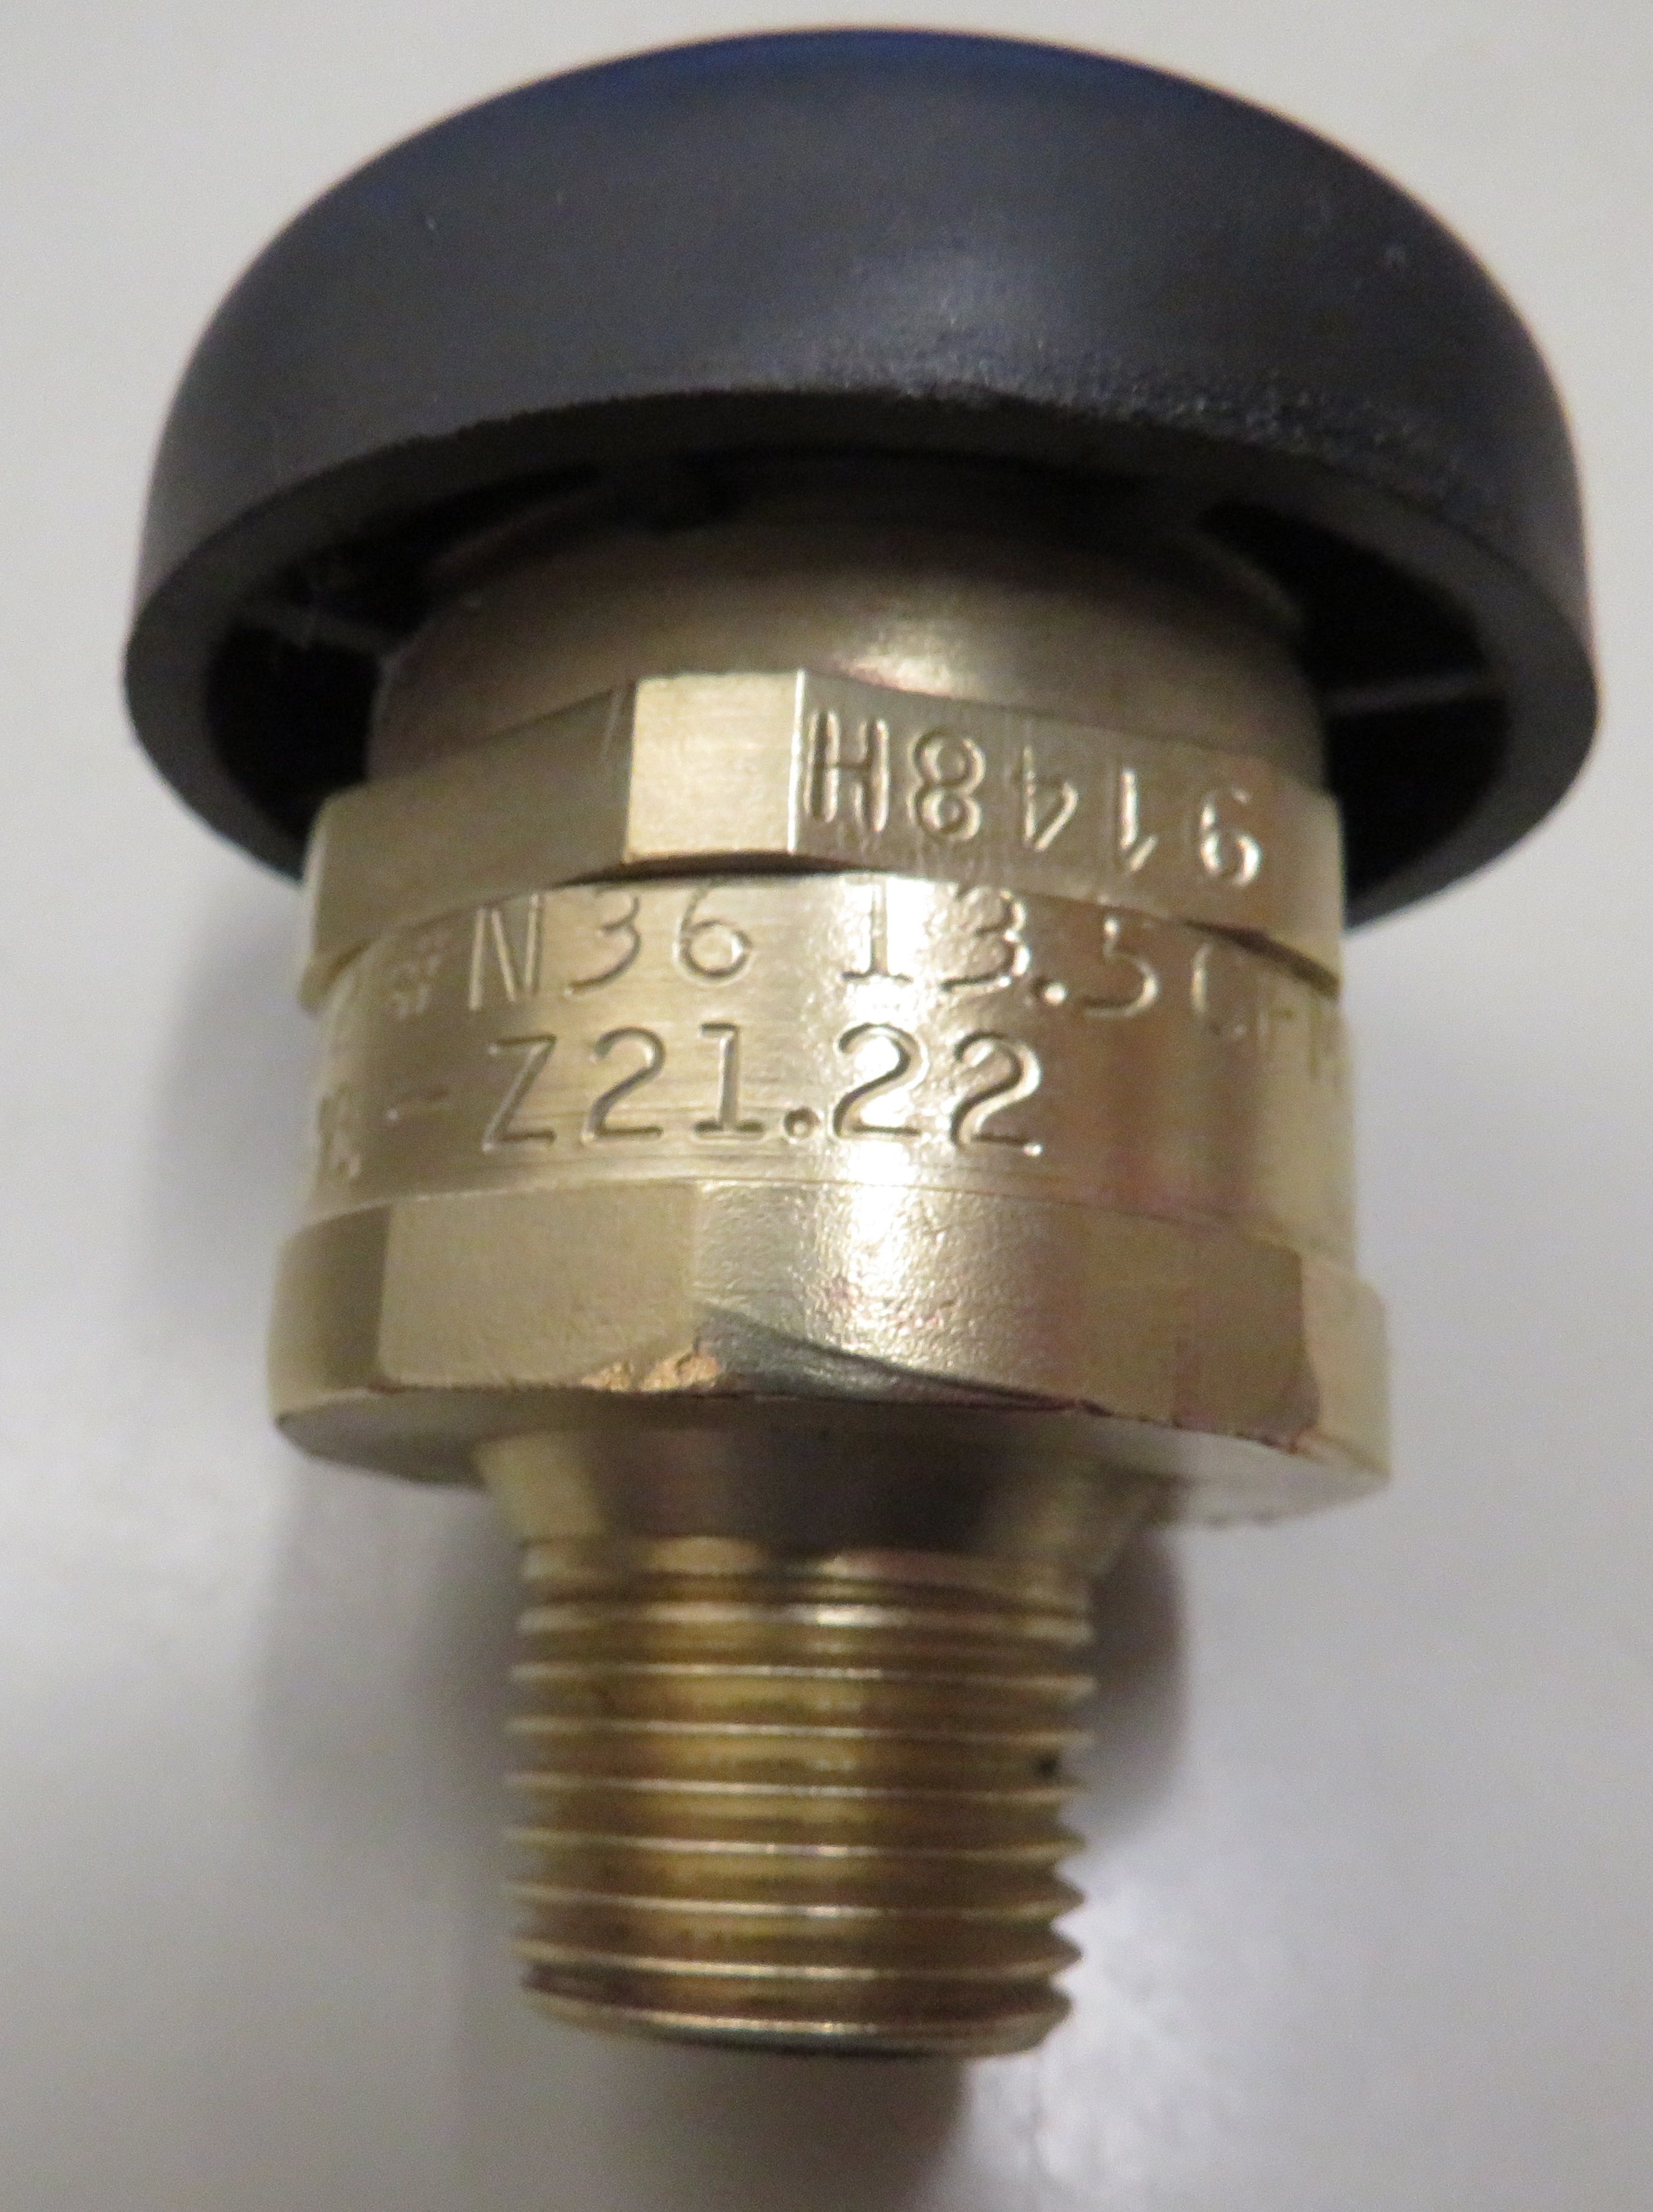 504-0062 Onan Vacuum Relief Valve OBSOLETE For KB-KR Electric Generating Sets 3/26/2024 THIS PART IS IN STOCK 3/26/2024